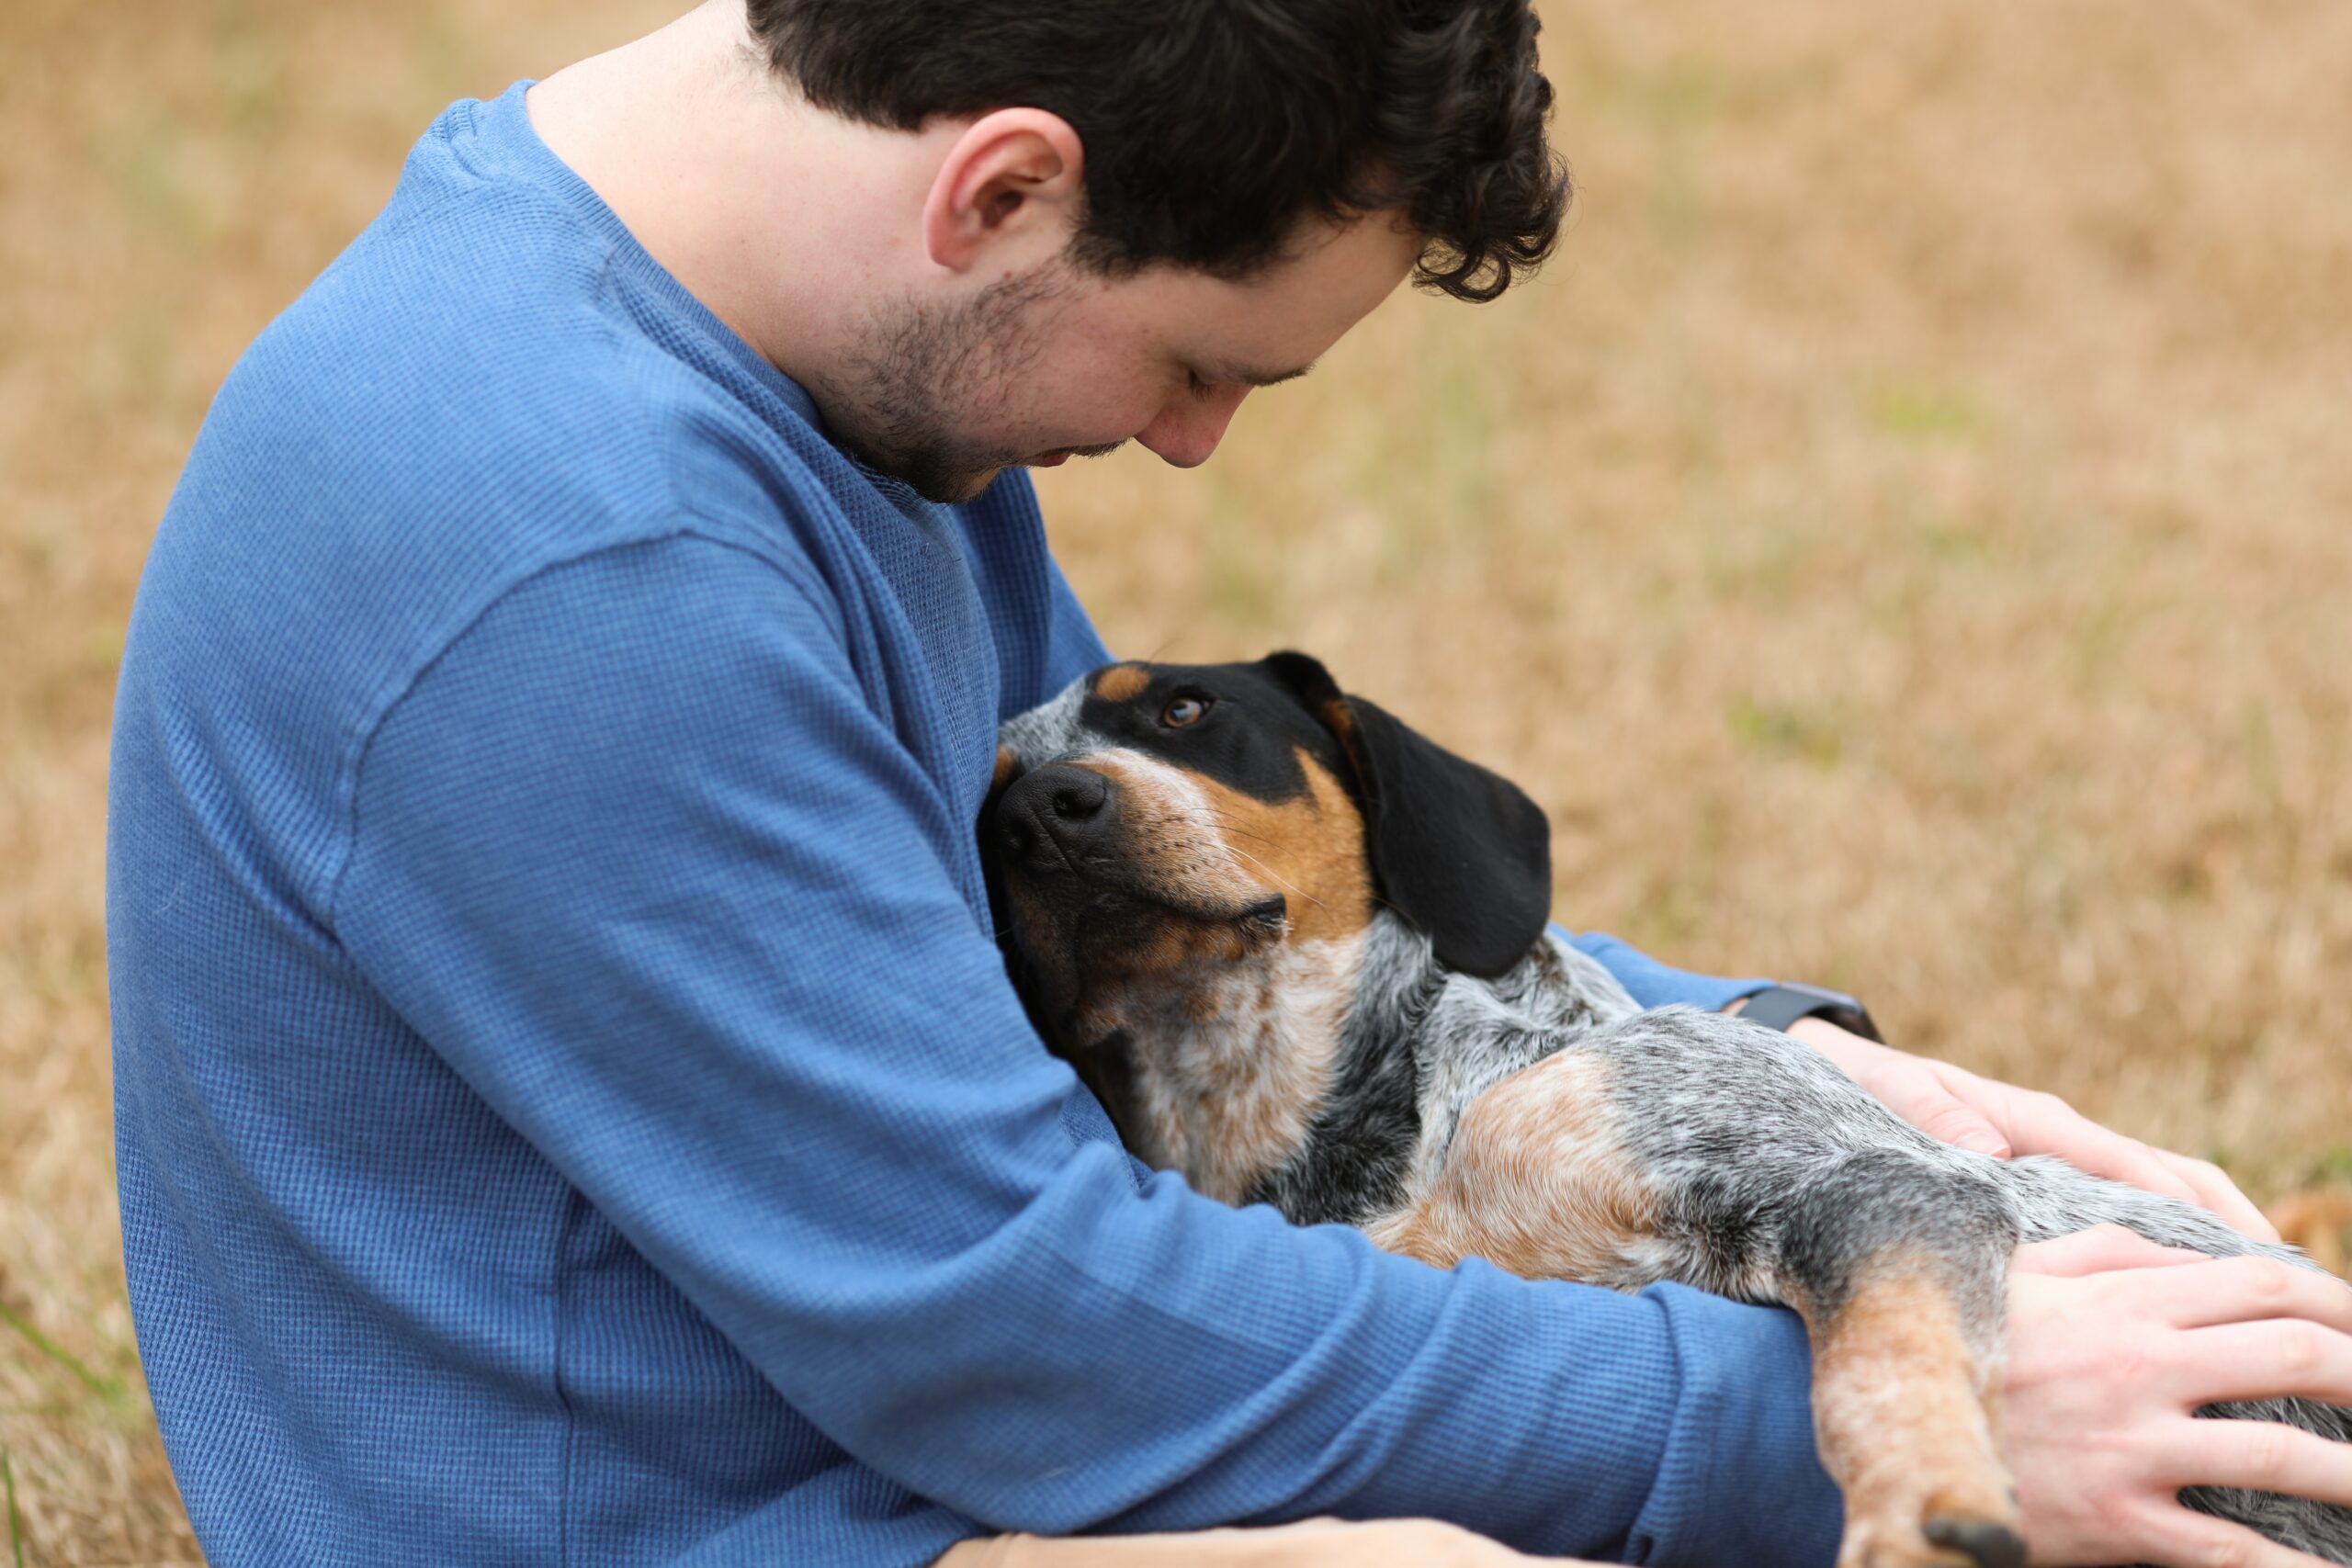 Man sitting with a dog in his lap looking up at him sweetly